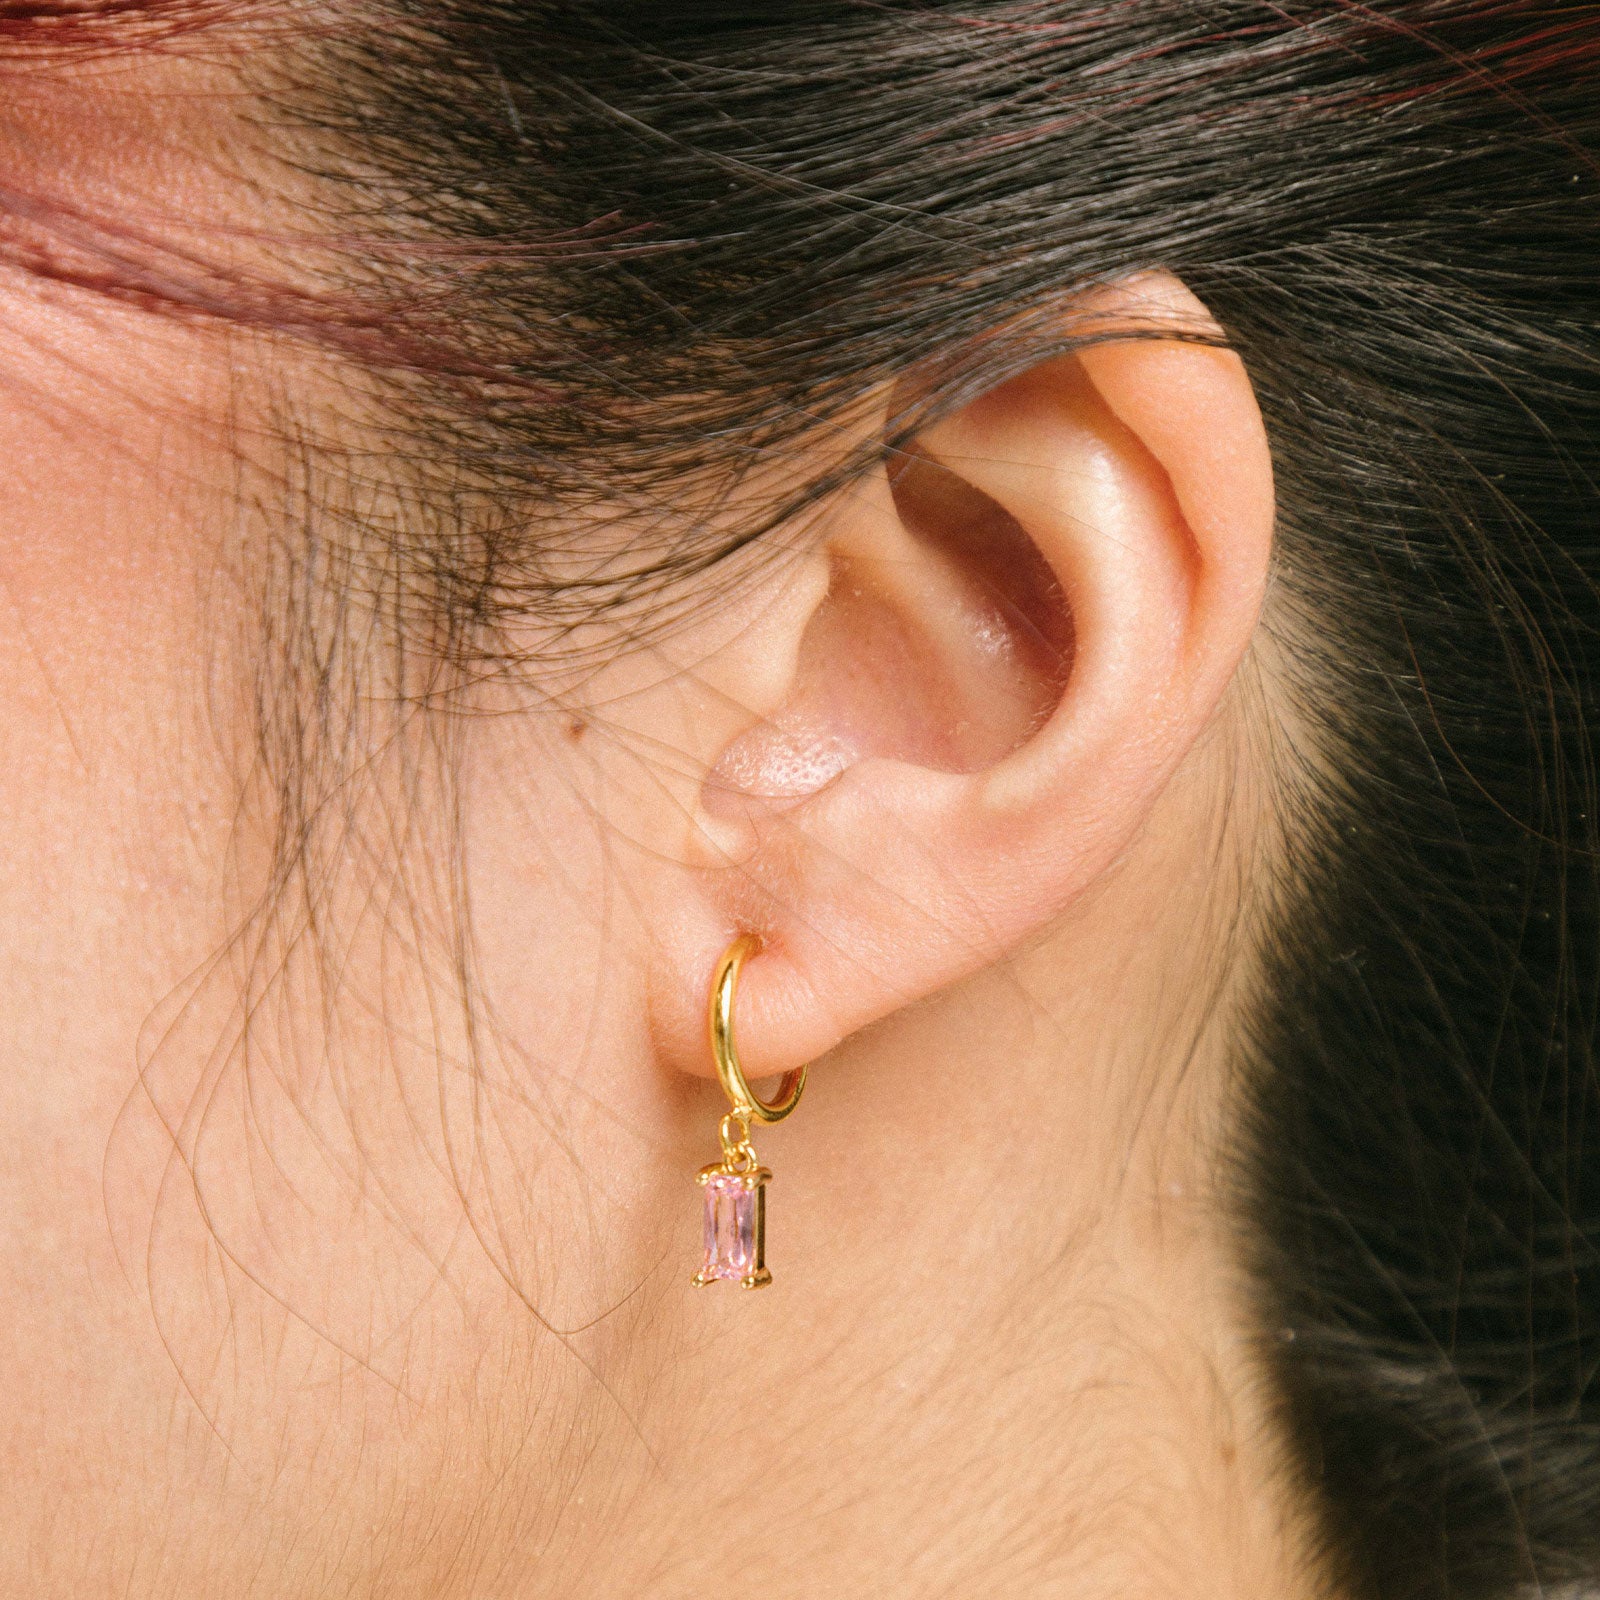 A model wearing the Rectangle Gem Clip-On Earrings offer a reliable, secure fit, thanks to their sliding spring closure. Suited for smaller or thinner earlobes, these earrings will typically remain comfortable for 2-4 hours. With an adjustable design, they will automatically adjust to your ear thickness. Each pair is crafted from brass and cubic zirconia.